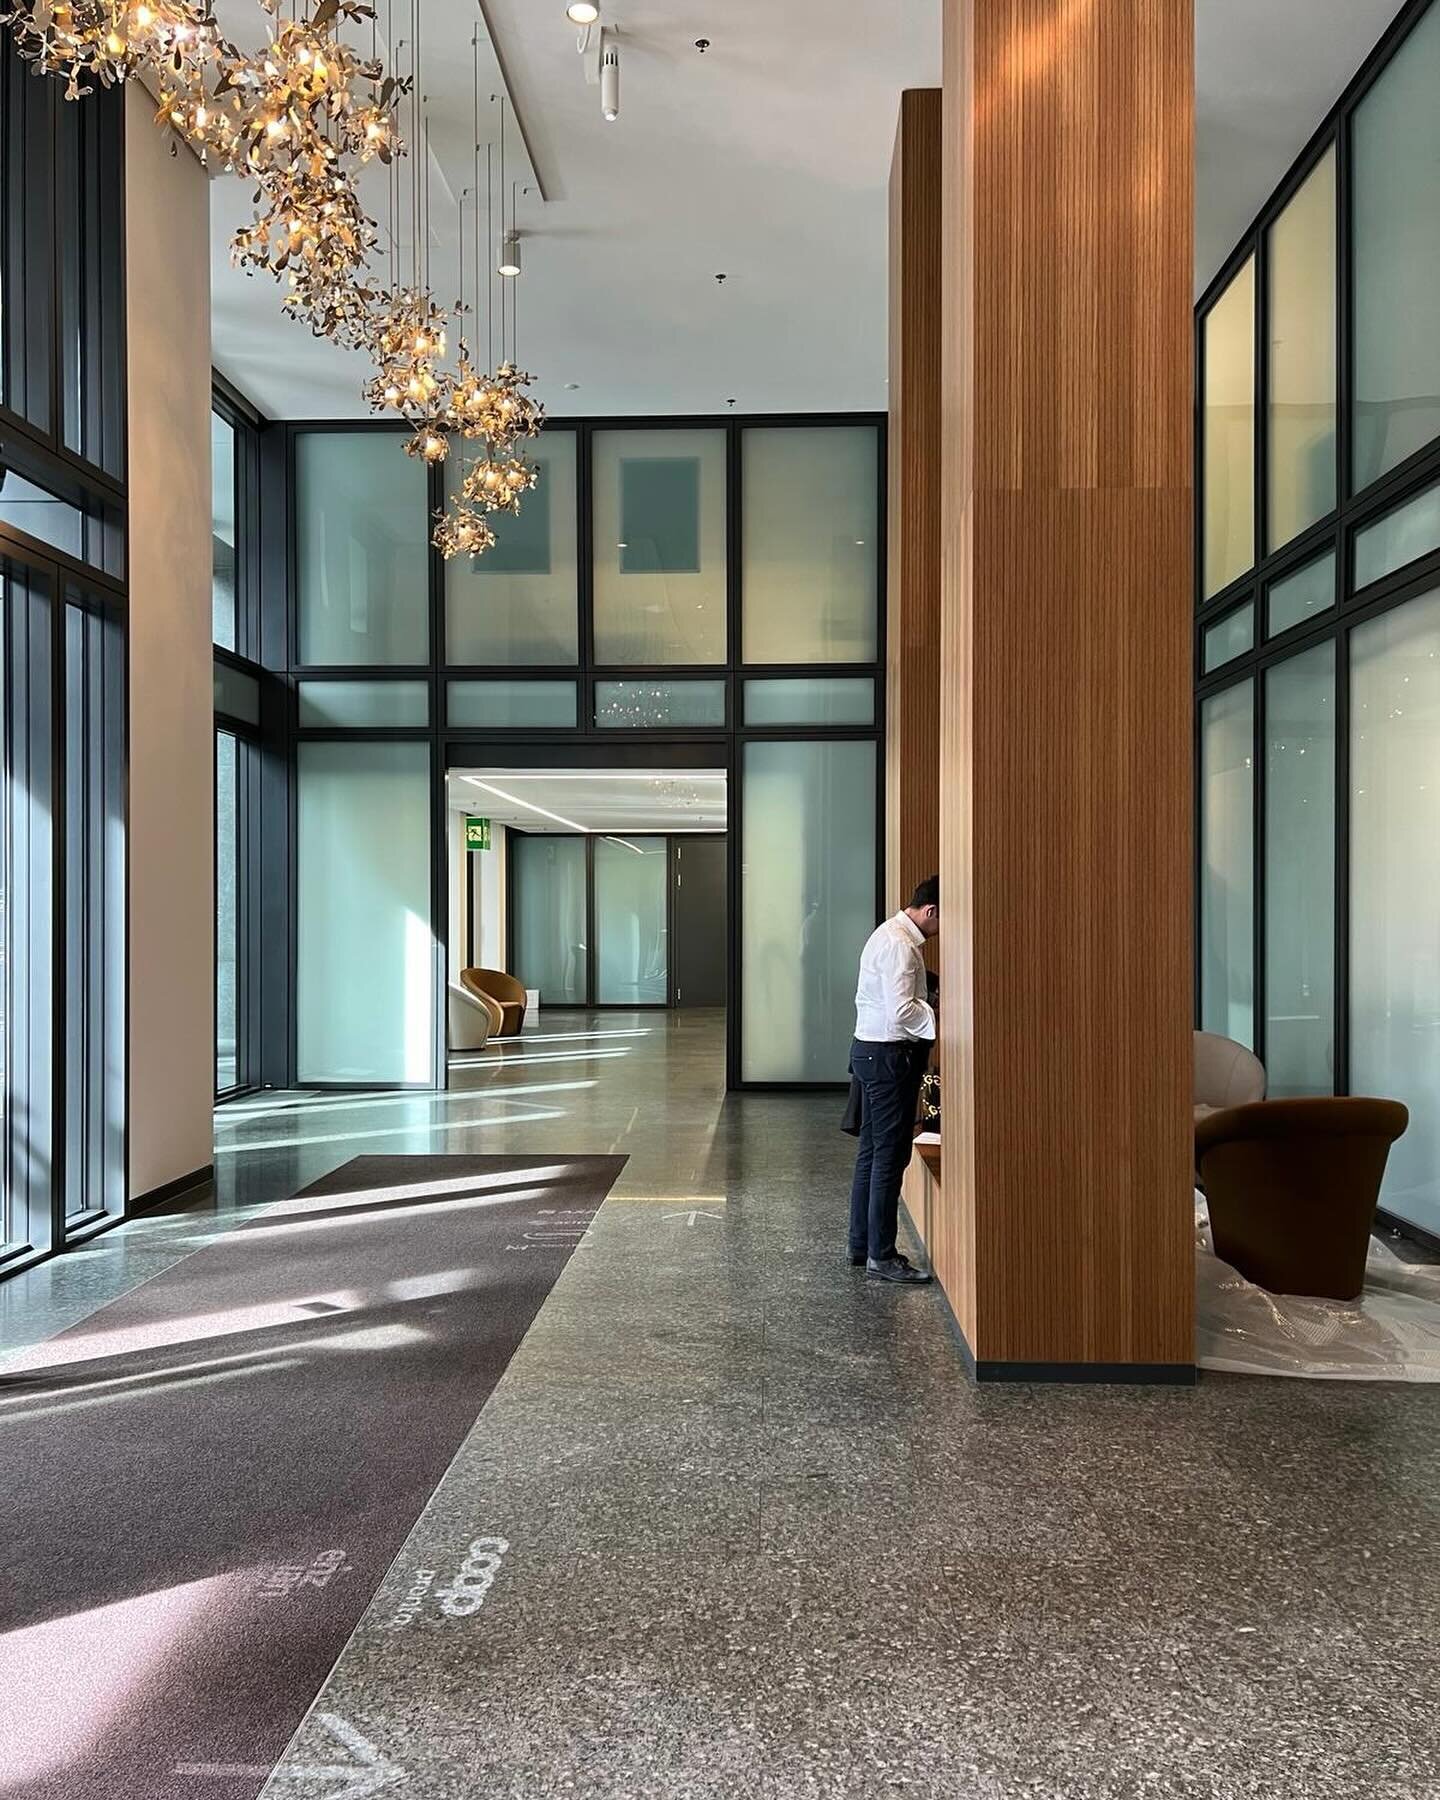 just in time before the easter weekend, we are installing an entrance hall of a swiss insurance company&hellip; a glimpse behind the scenes&hellip; work in progress&hellip; remember what craftsmanship it takes to reach a result that looks totally nat